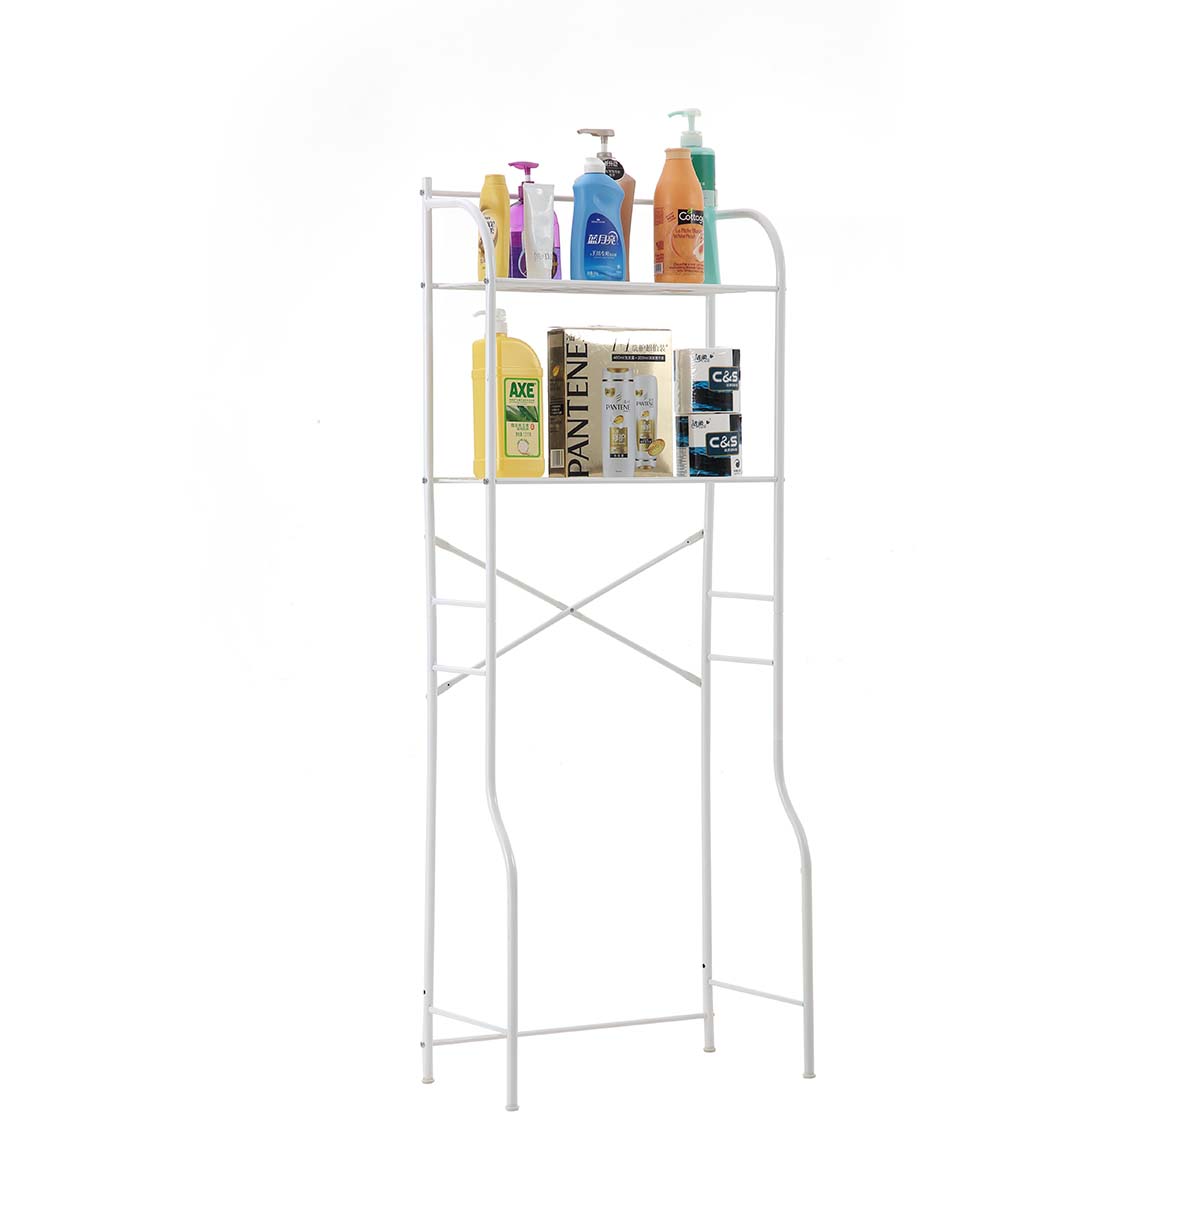 2-Tier Wire Shelving Units / Over The Toilet Storage Shelf / Bathroom Space Saving Organizer Rack Adjustable Stand 